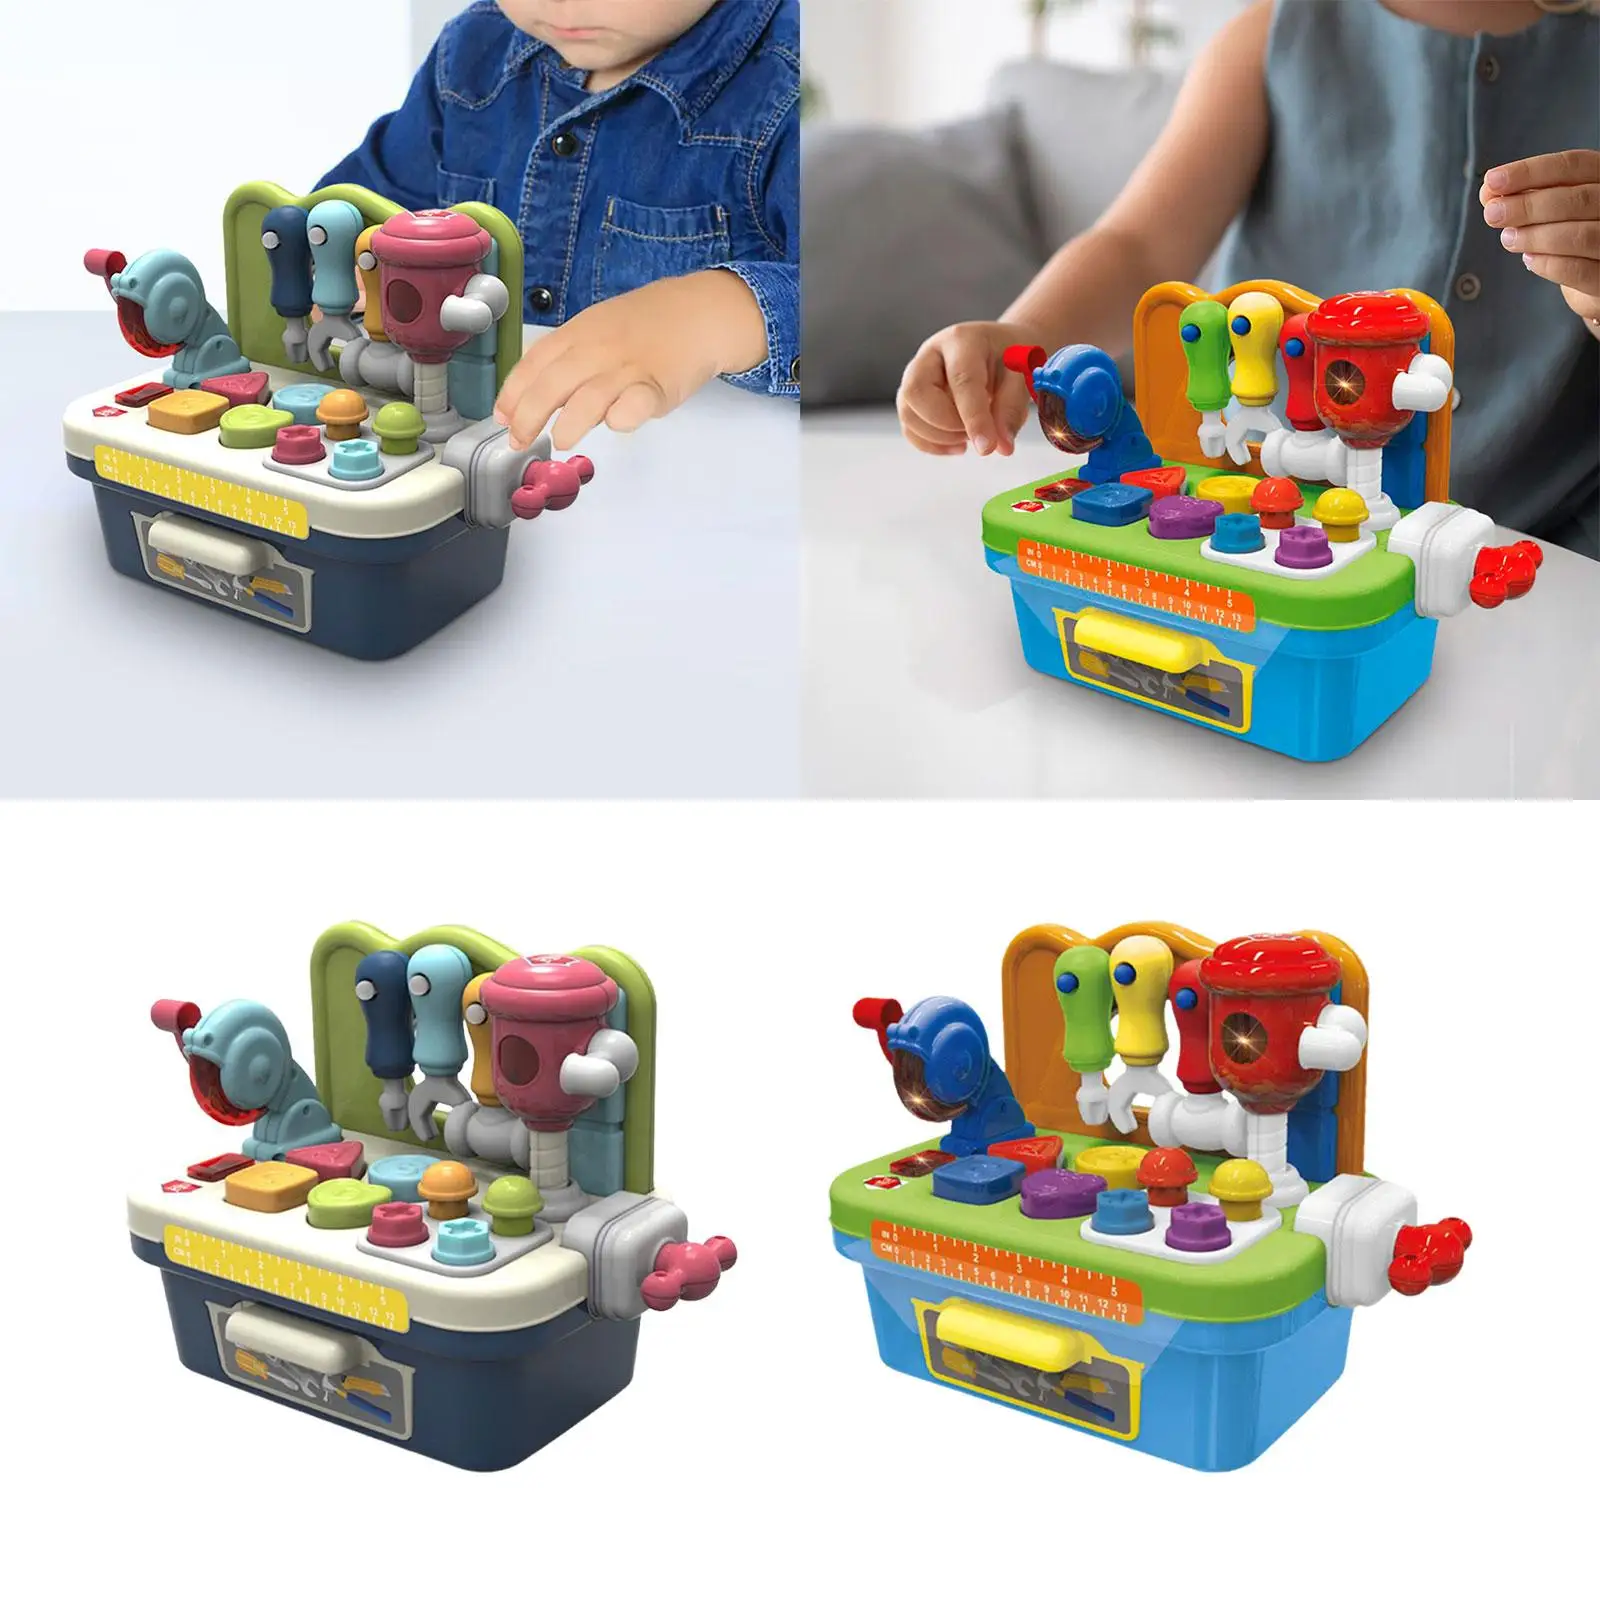 Construction Workbench Toy with Sound Effect and Light with Shape Sorter Tool Kids Tool Bench for 1 2 3 4 Years Old Baby Kids